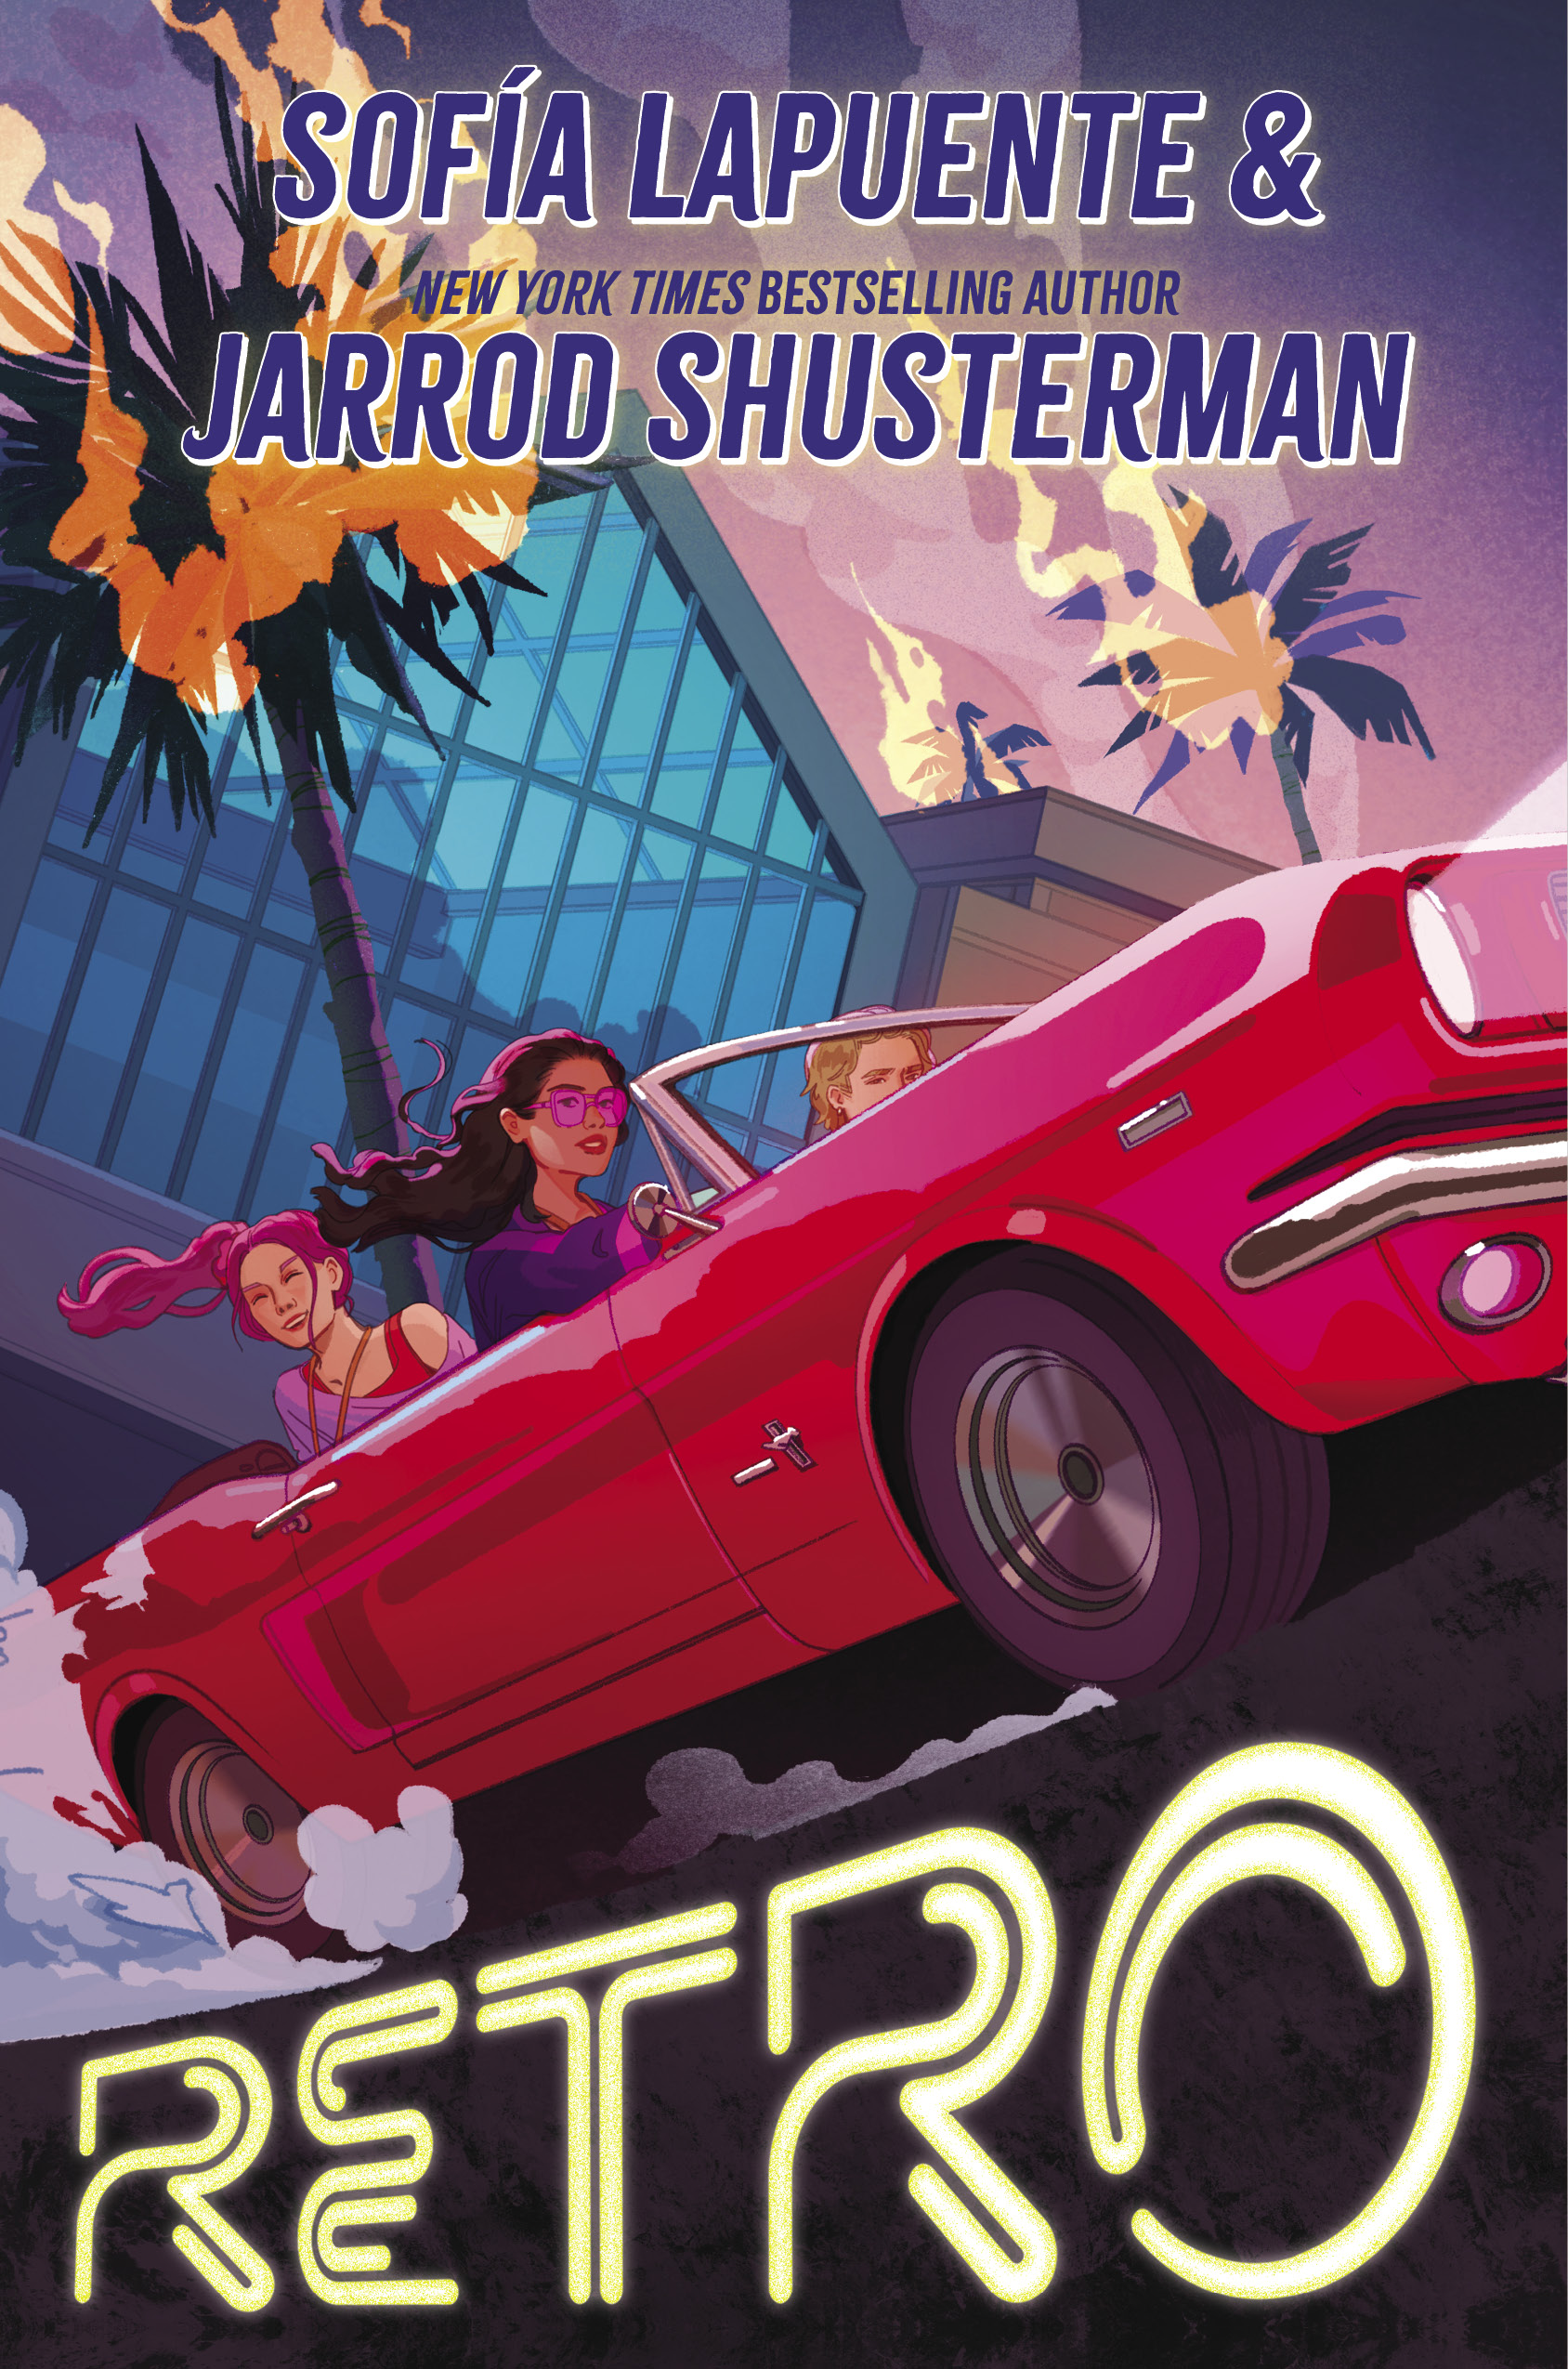 Author Chat With Jarrod Shusterman and Sofía Lapuente (Retro), Plus Giveaway! ~ US Only, No P.O Boxes!